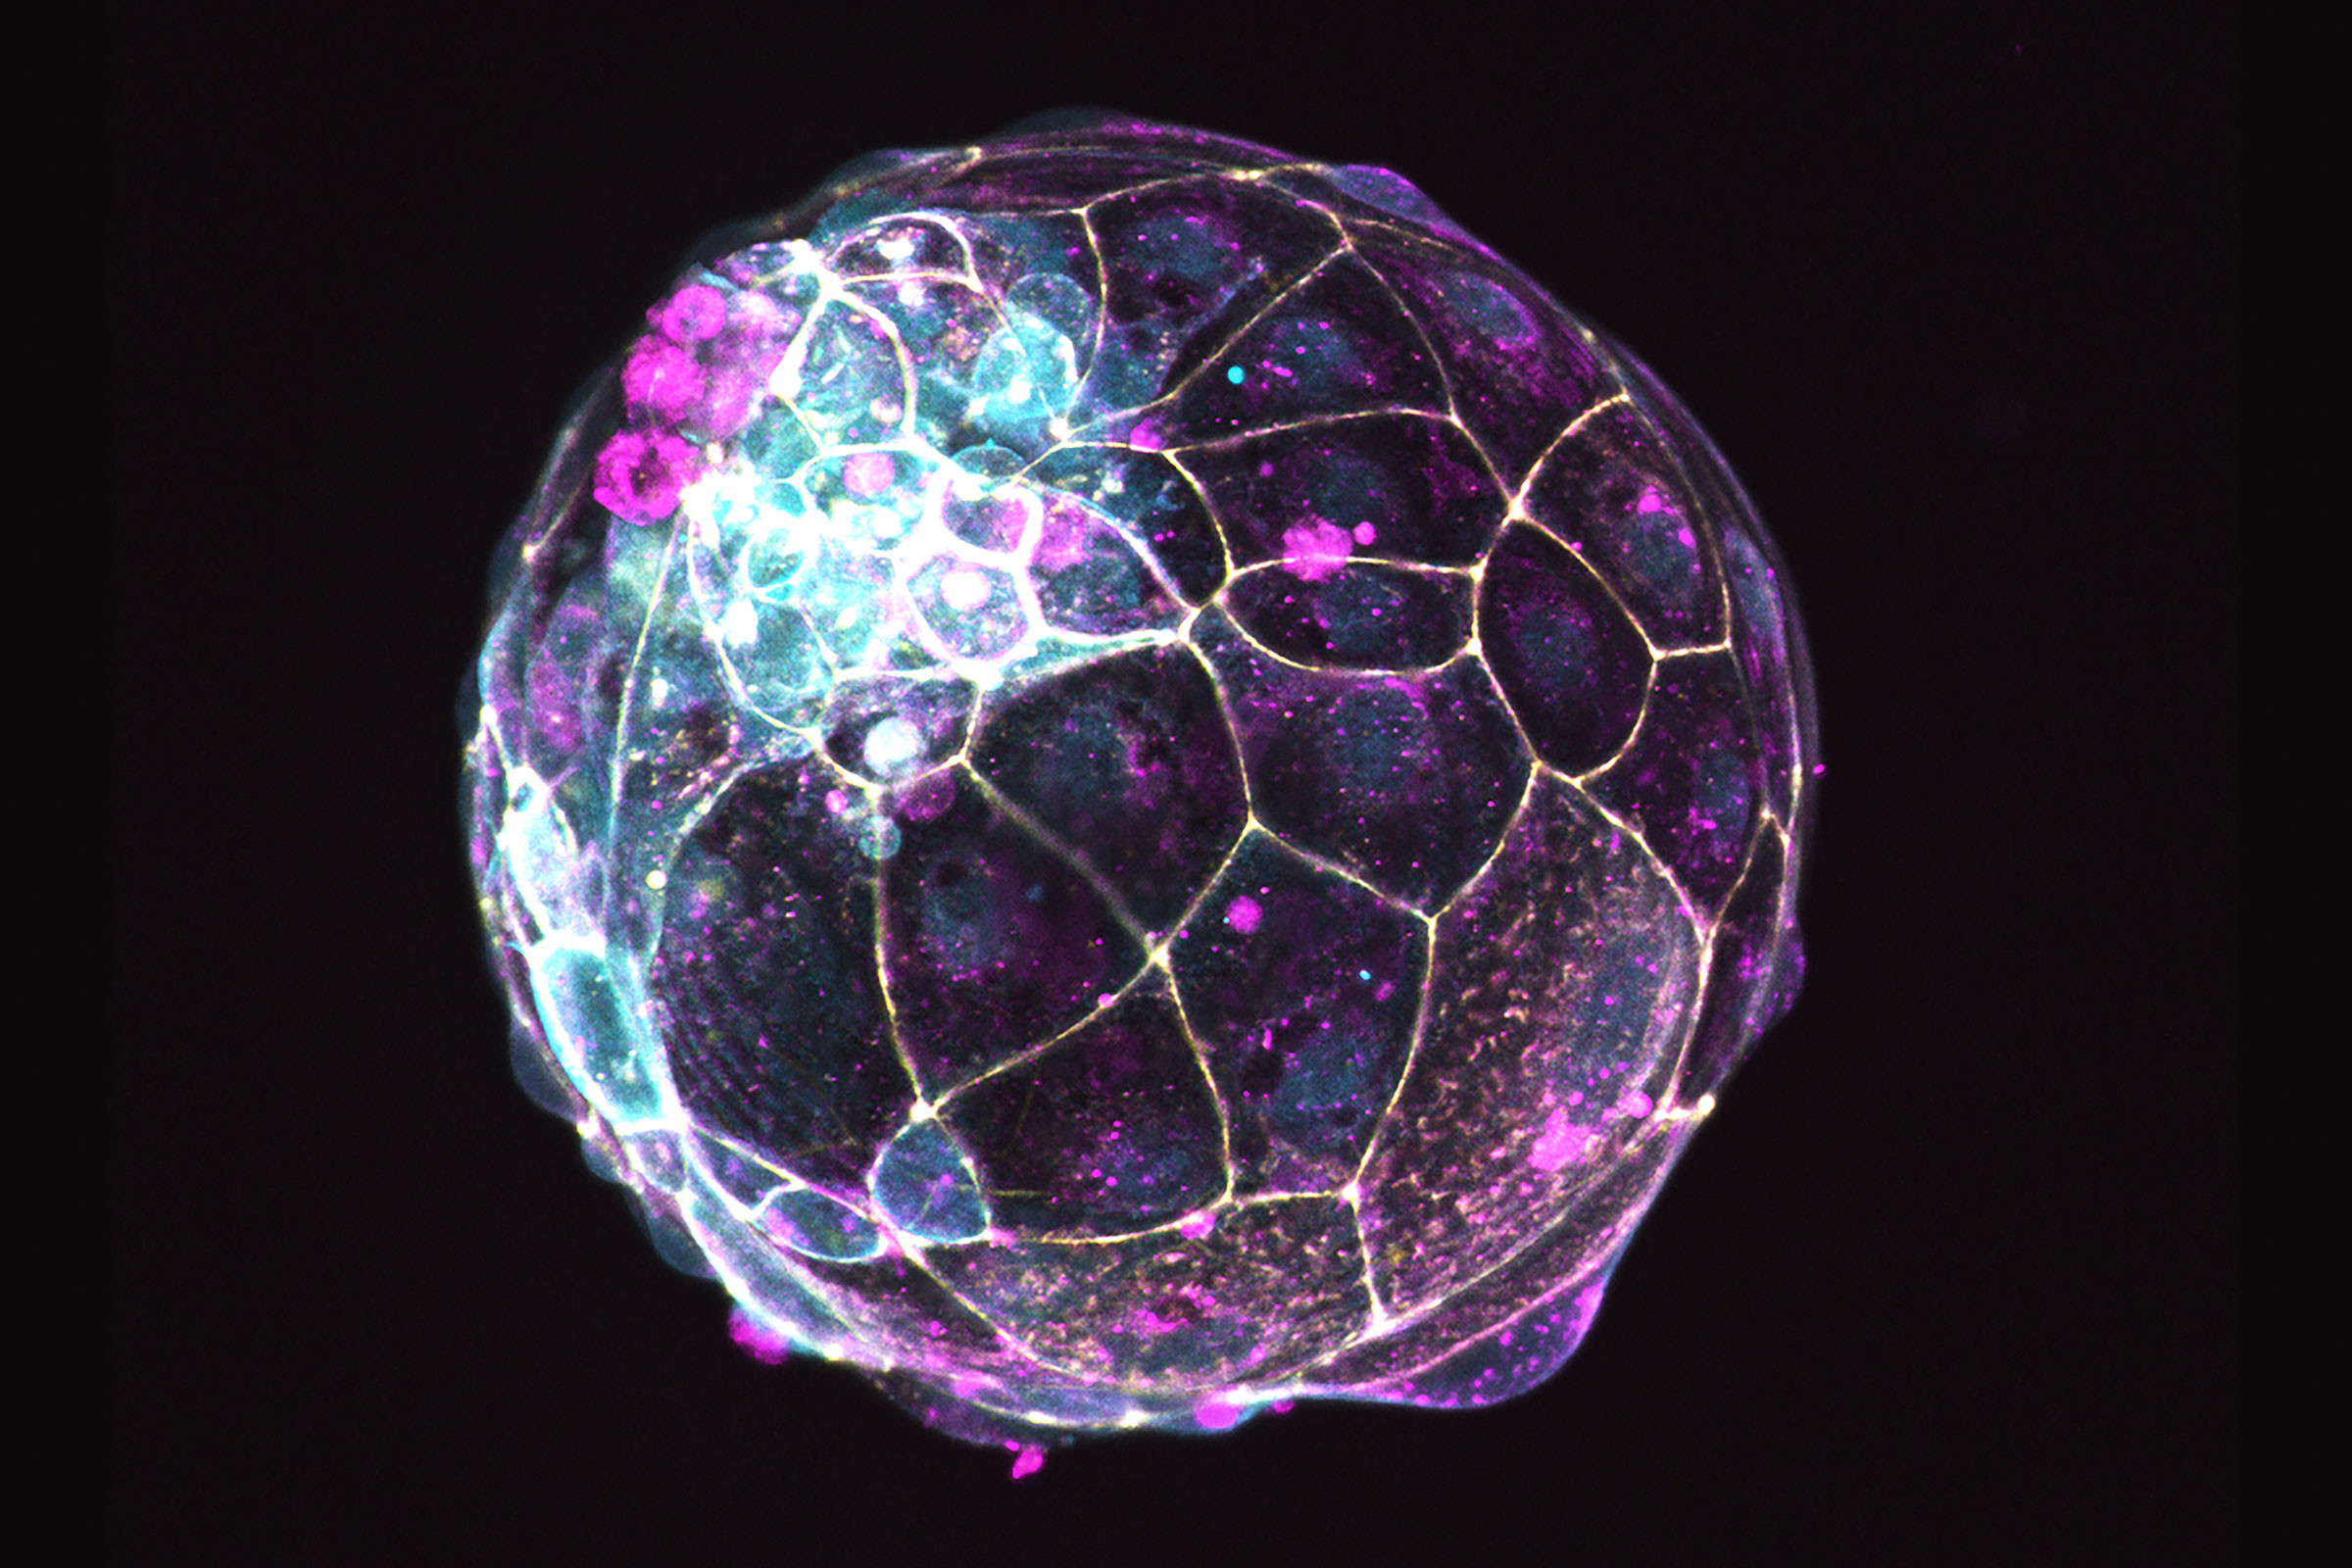 Microscope image of a blastoid, a model of an early embryo